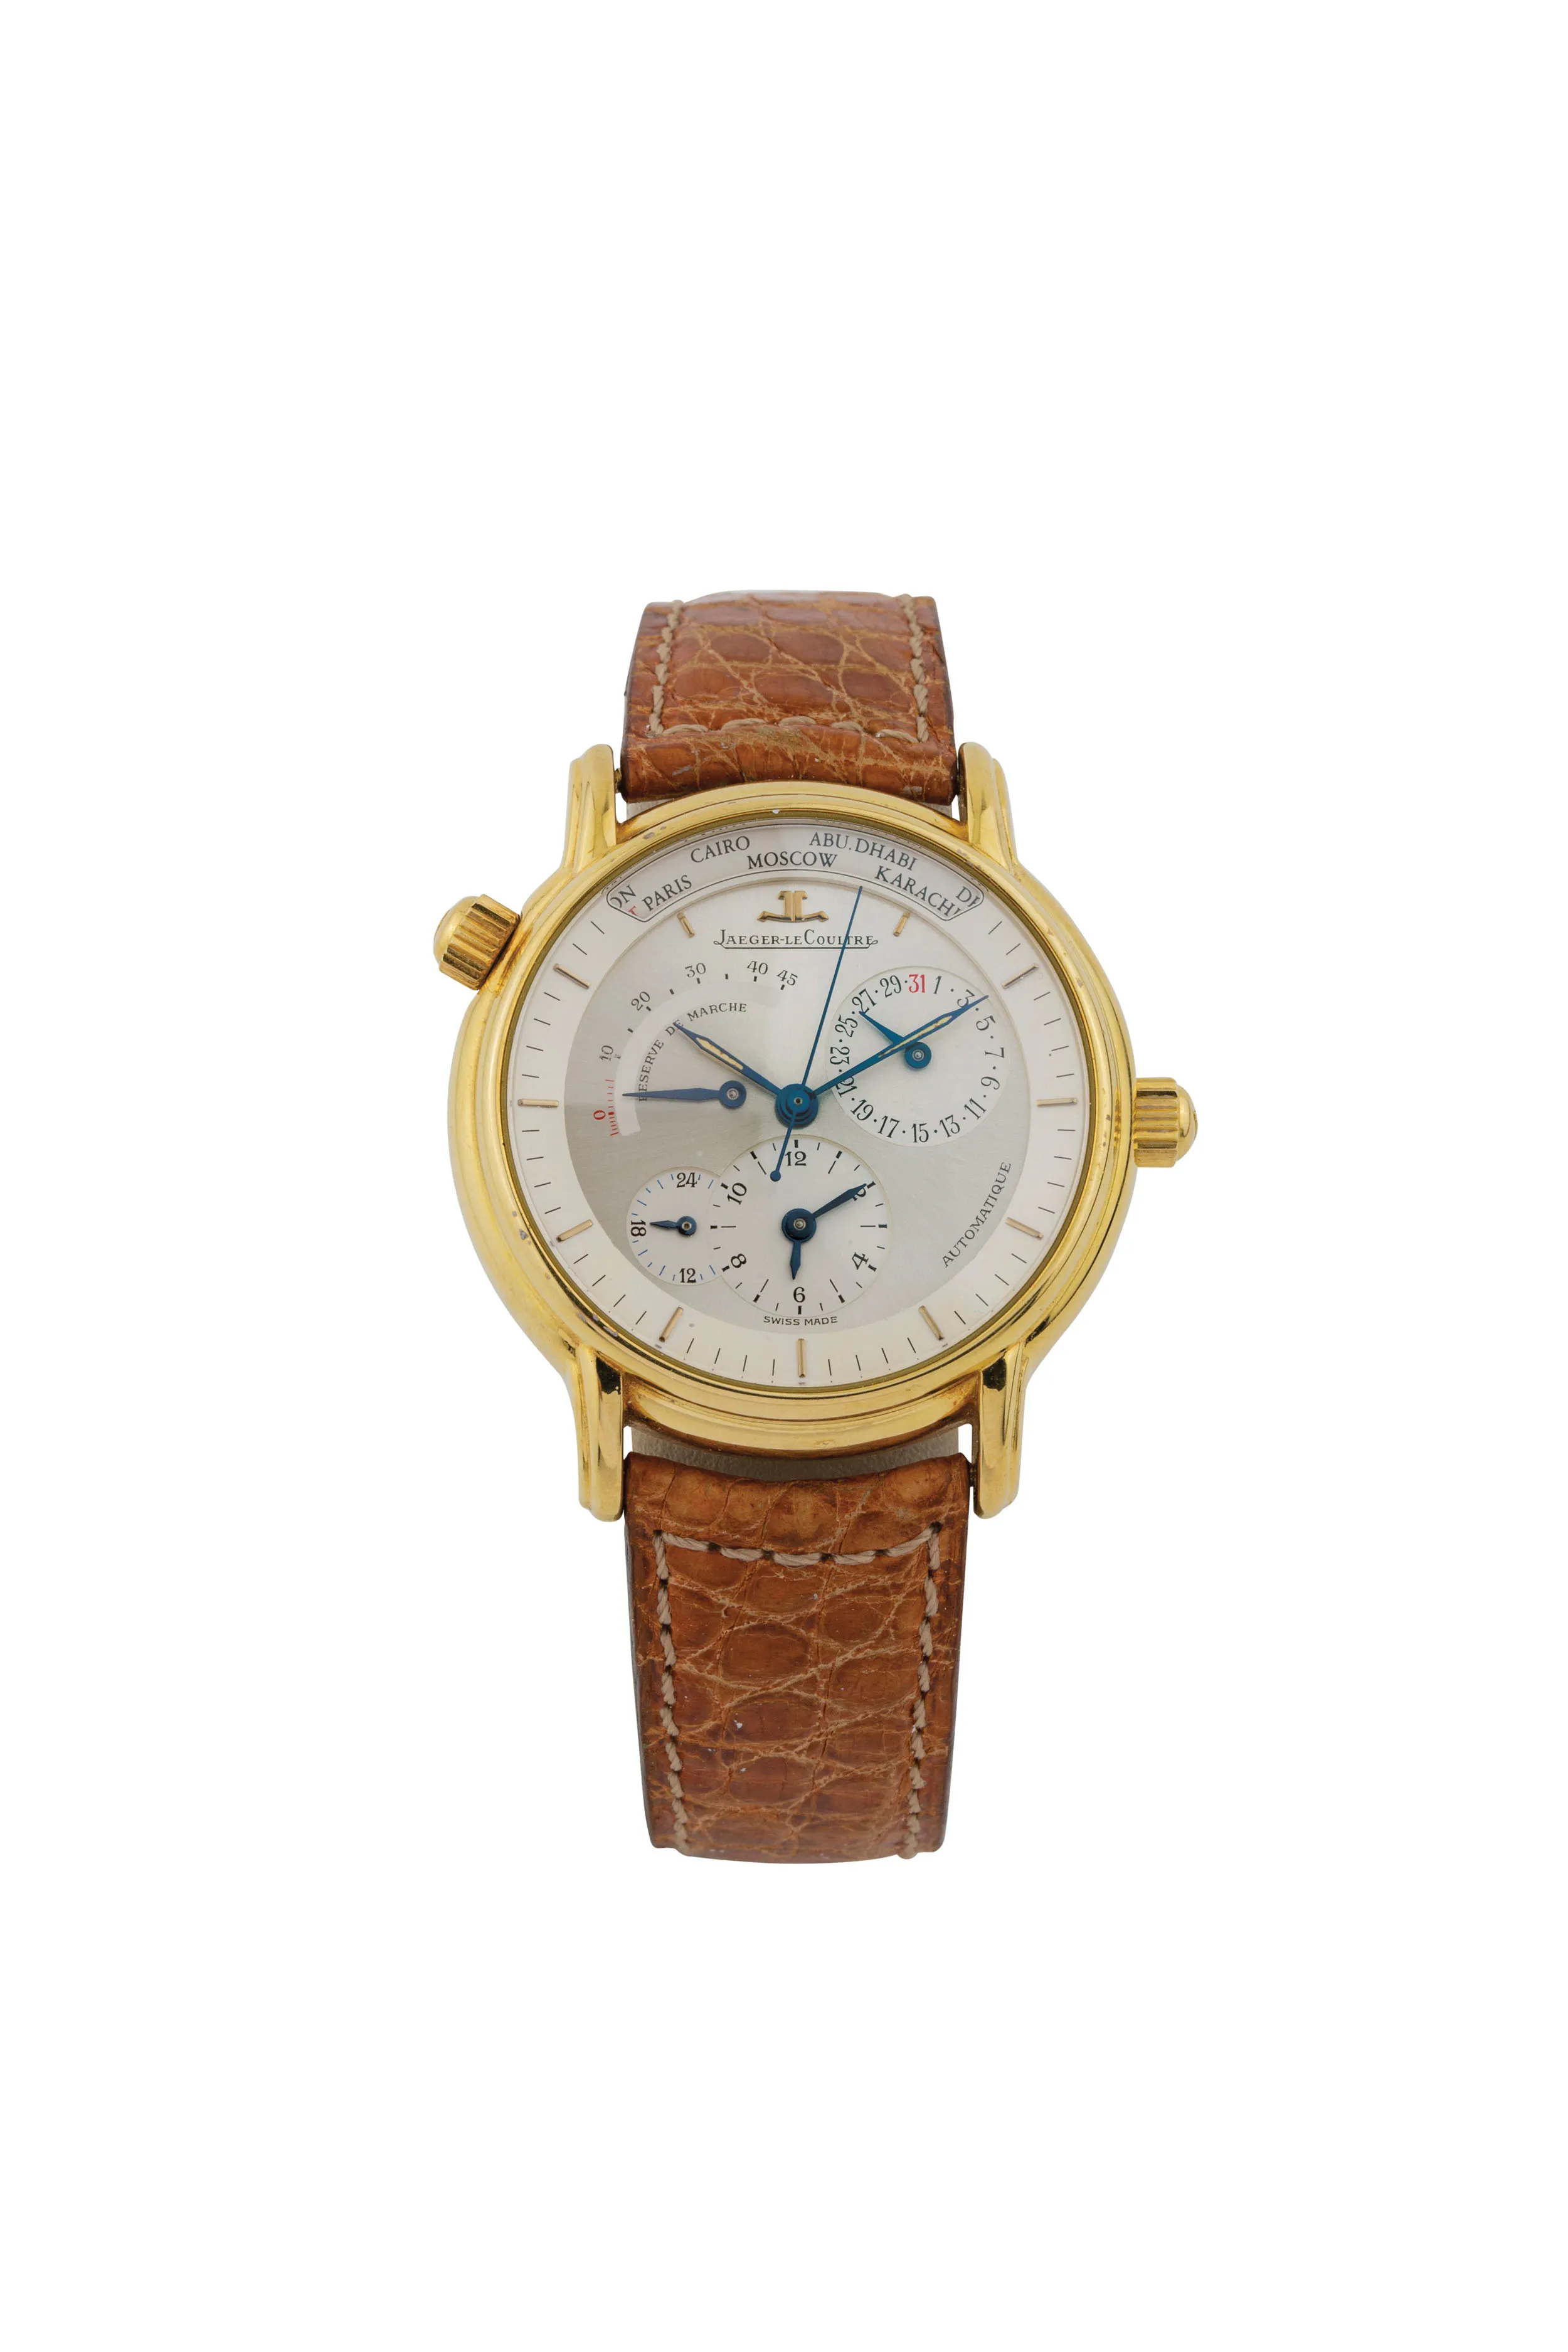 Jaeger-LeCoultre 0199 MGM 37mm Yellow gold